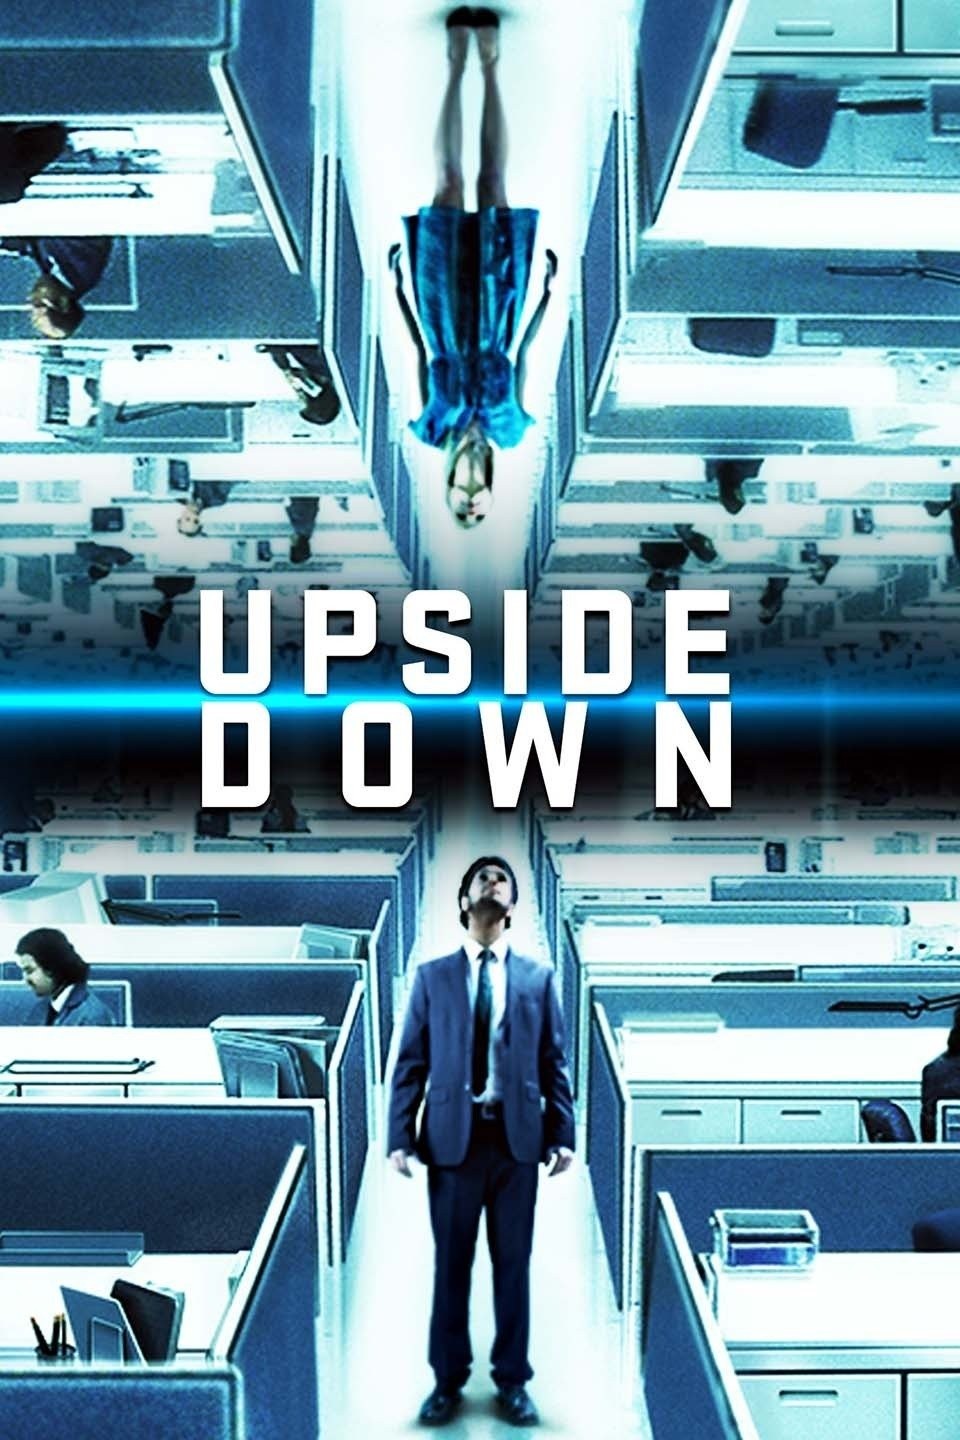 Upside Down (2012) BluRay {English With Subtitles} Full Movie 480p [400MB] | 720p [900MB] | 1080p [1.6GB]